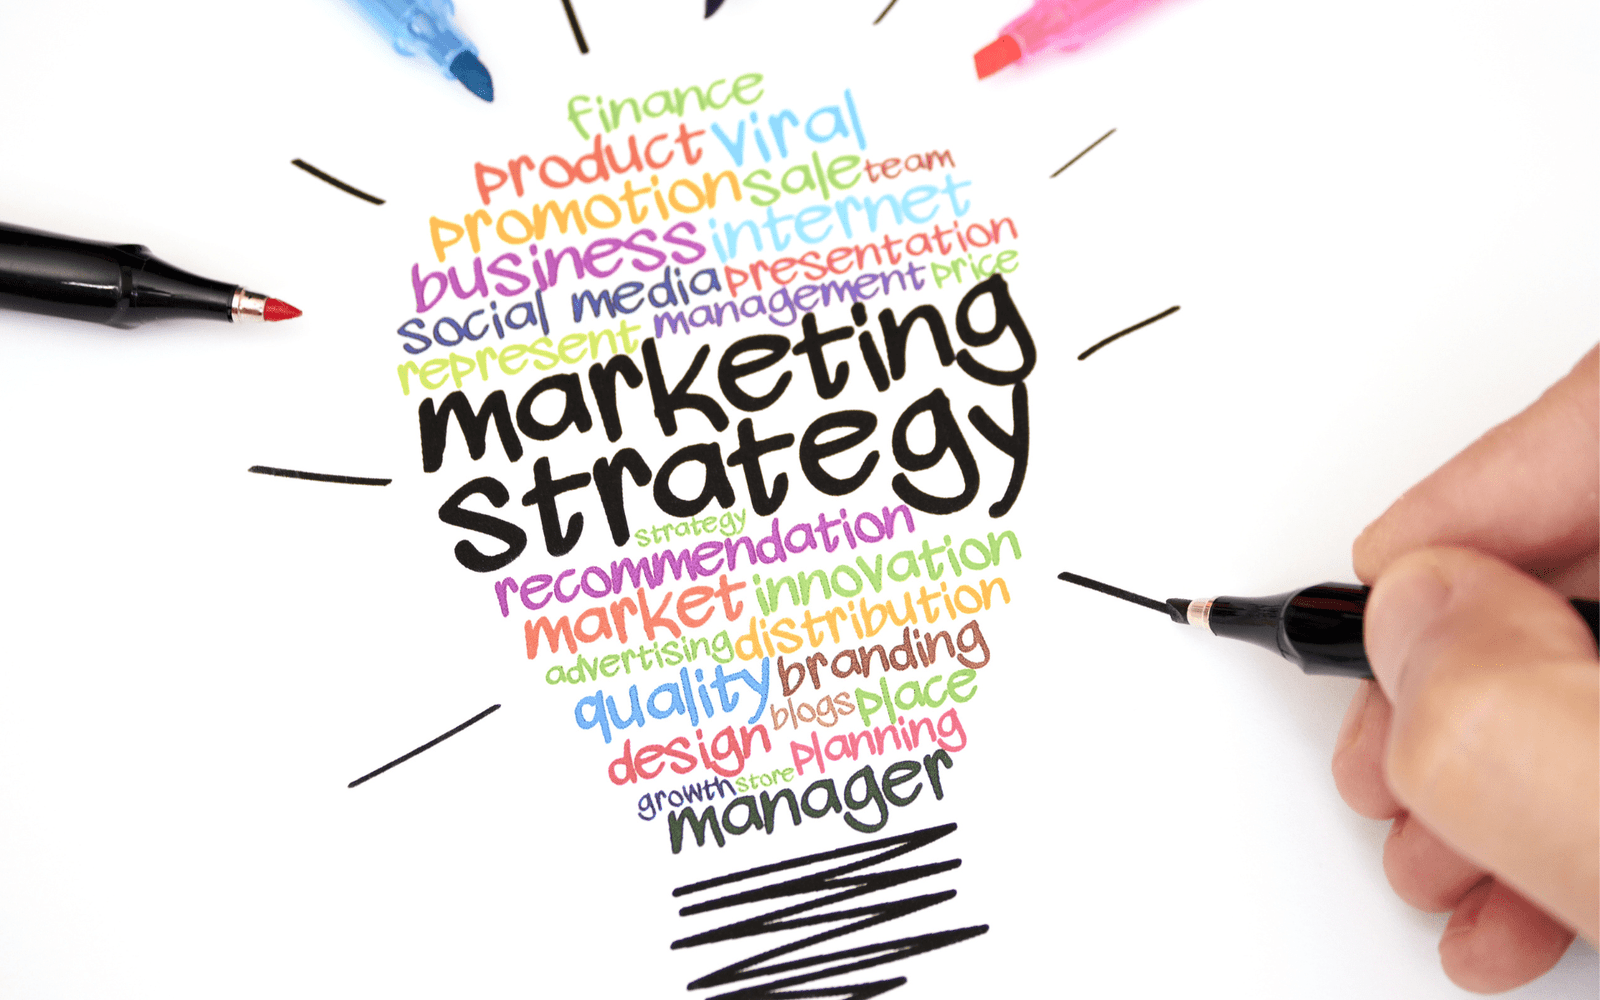 TIPS FOR A SUCCESSFUL DIGITAL MARKETING STRATEGY.